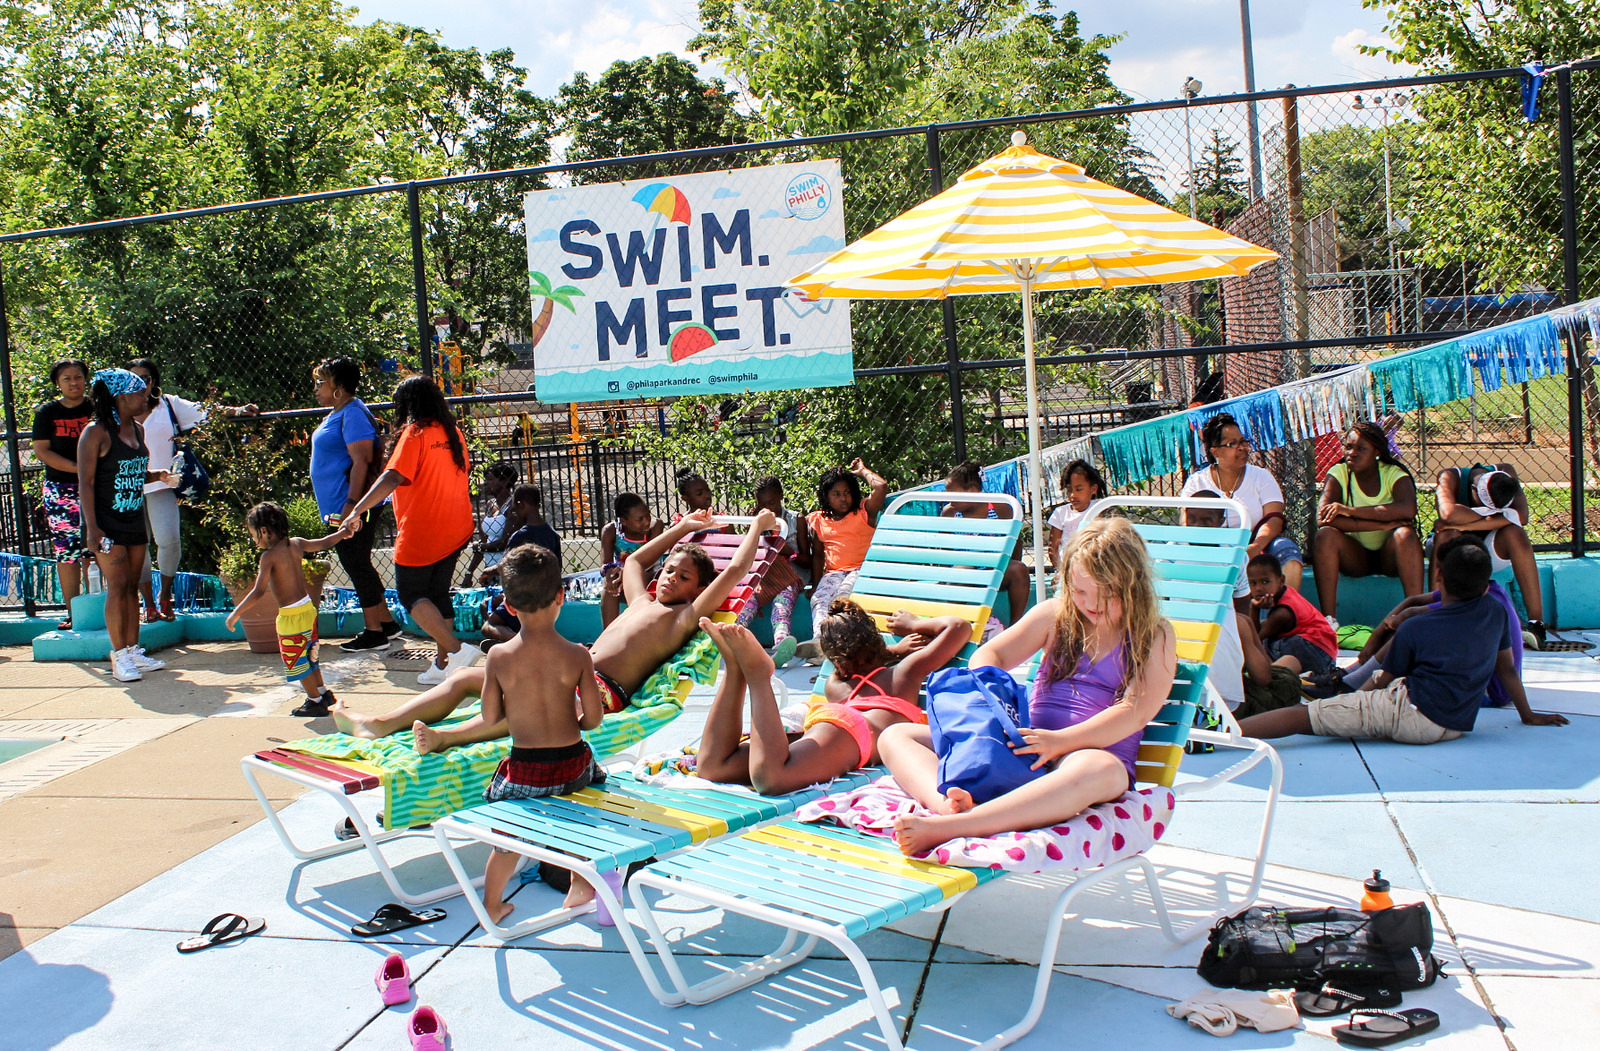 Child lounge on chairs near a pool and a Philadelphia Parks and Rec Swim Meet sign at a local rec center.